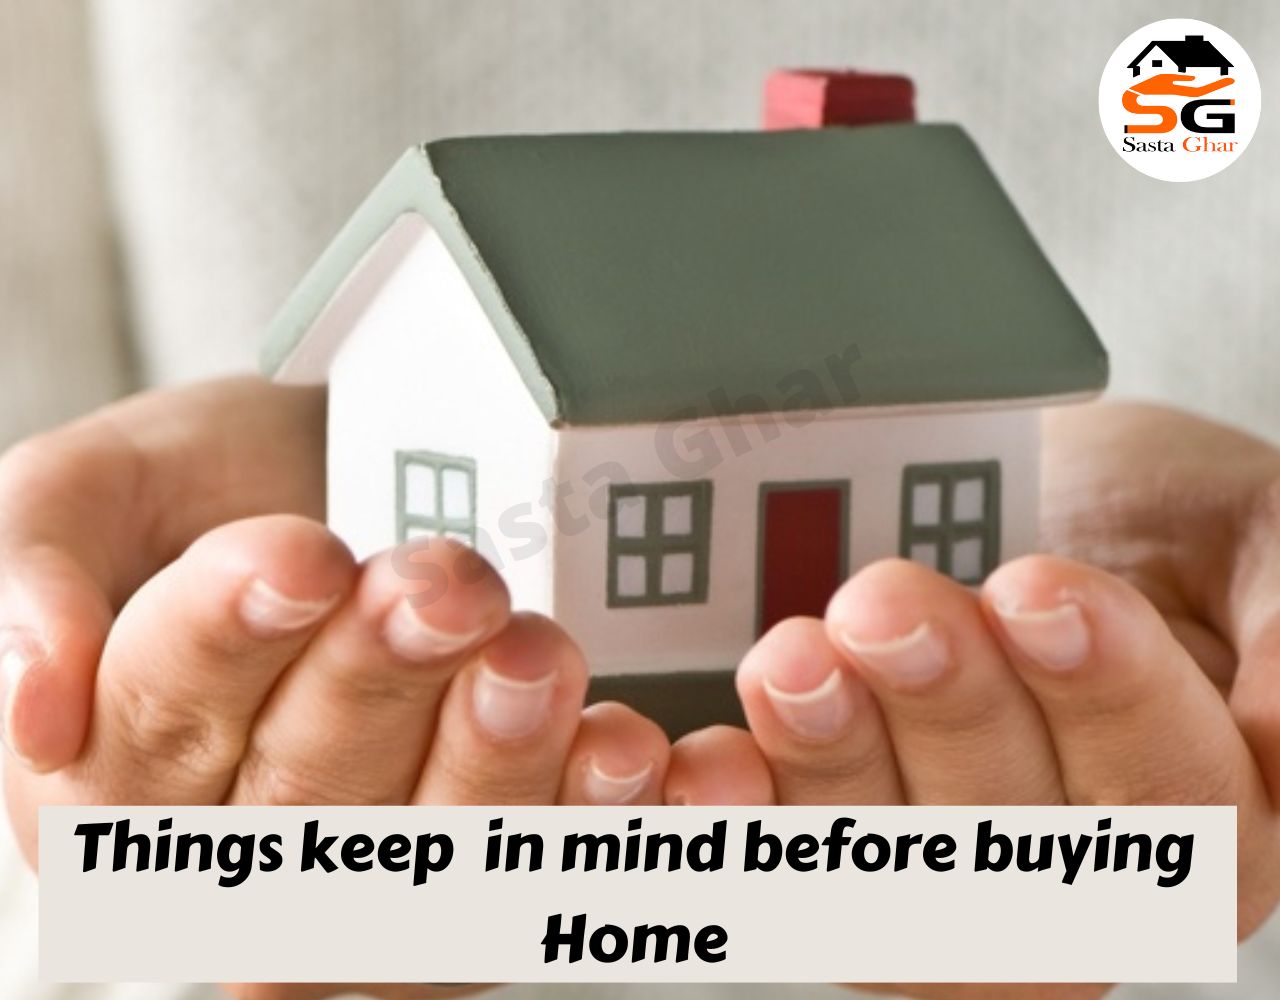 Things keep in mind before buying home